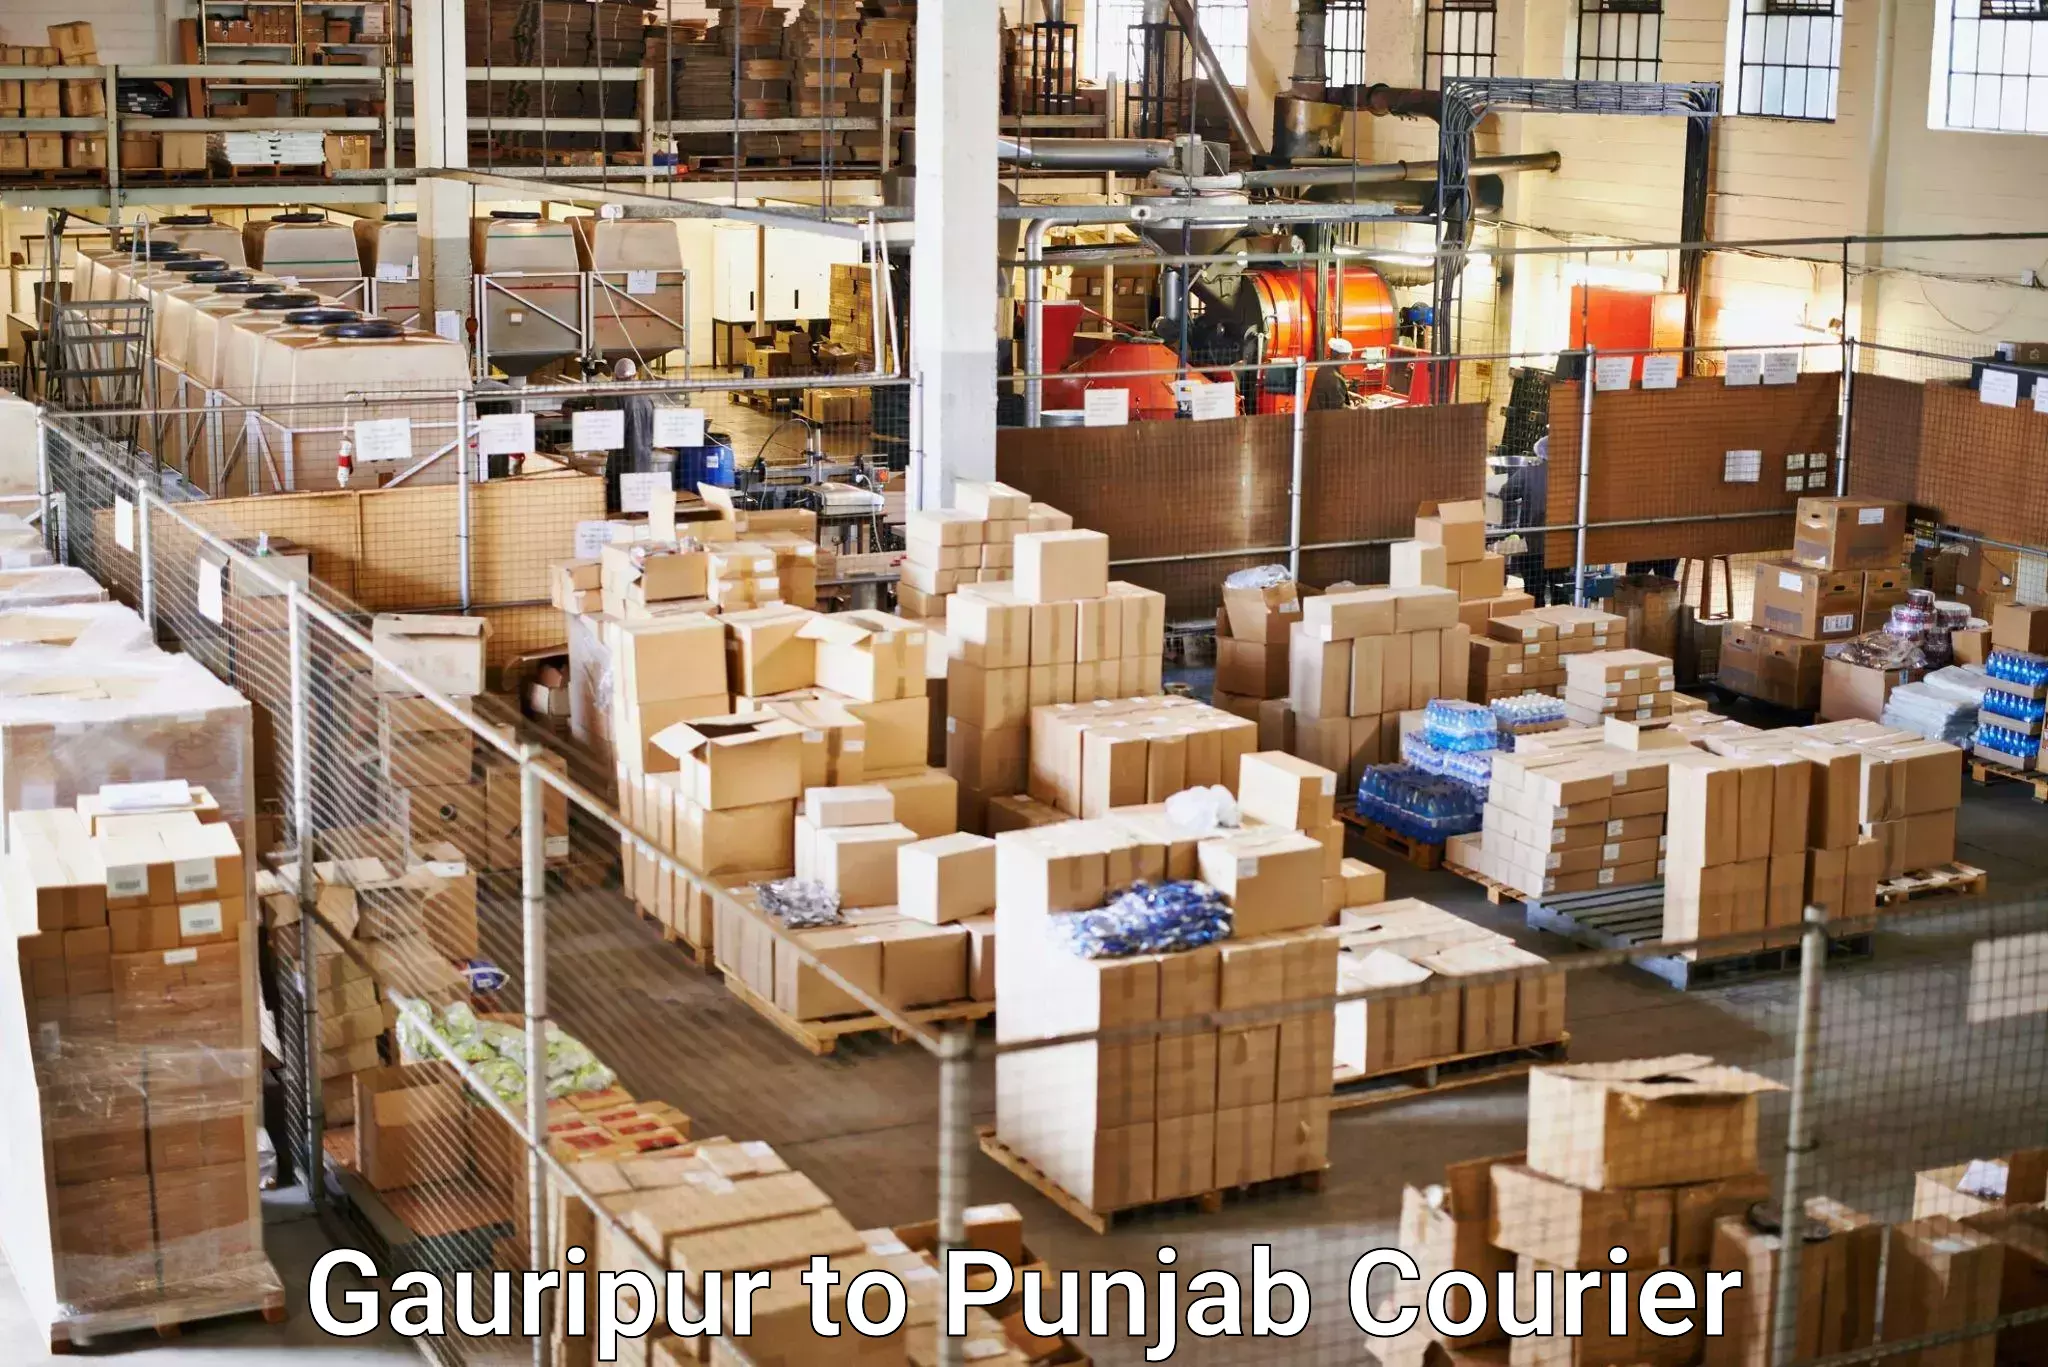 Courier service partnerships Gauripur to Bathinda